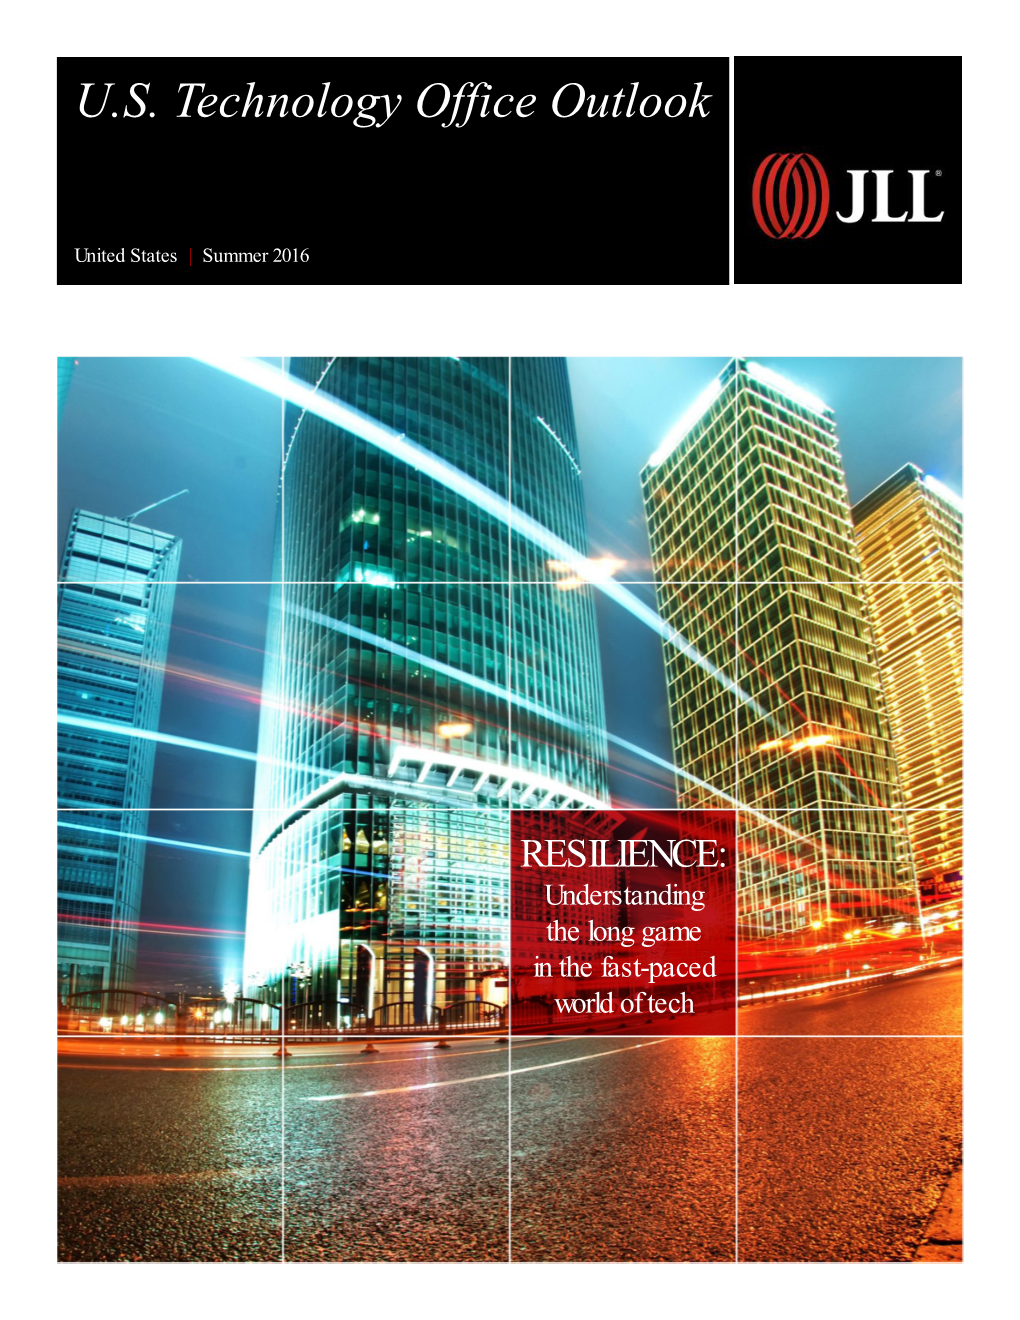 JLL LOCATOR MATRIX 11 Identifying the Most Resilient Markets for the Future: the JLL TECH MARKET SCORE 13 Diversity Will Drive MARKET RESILIENCE 15 APPENDIX 62